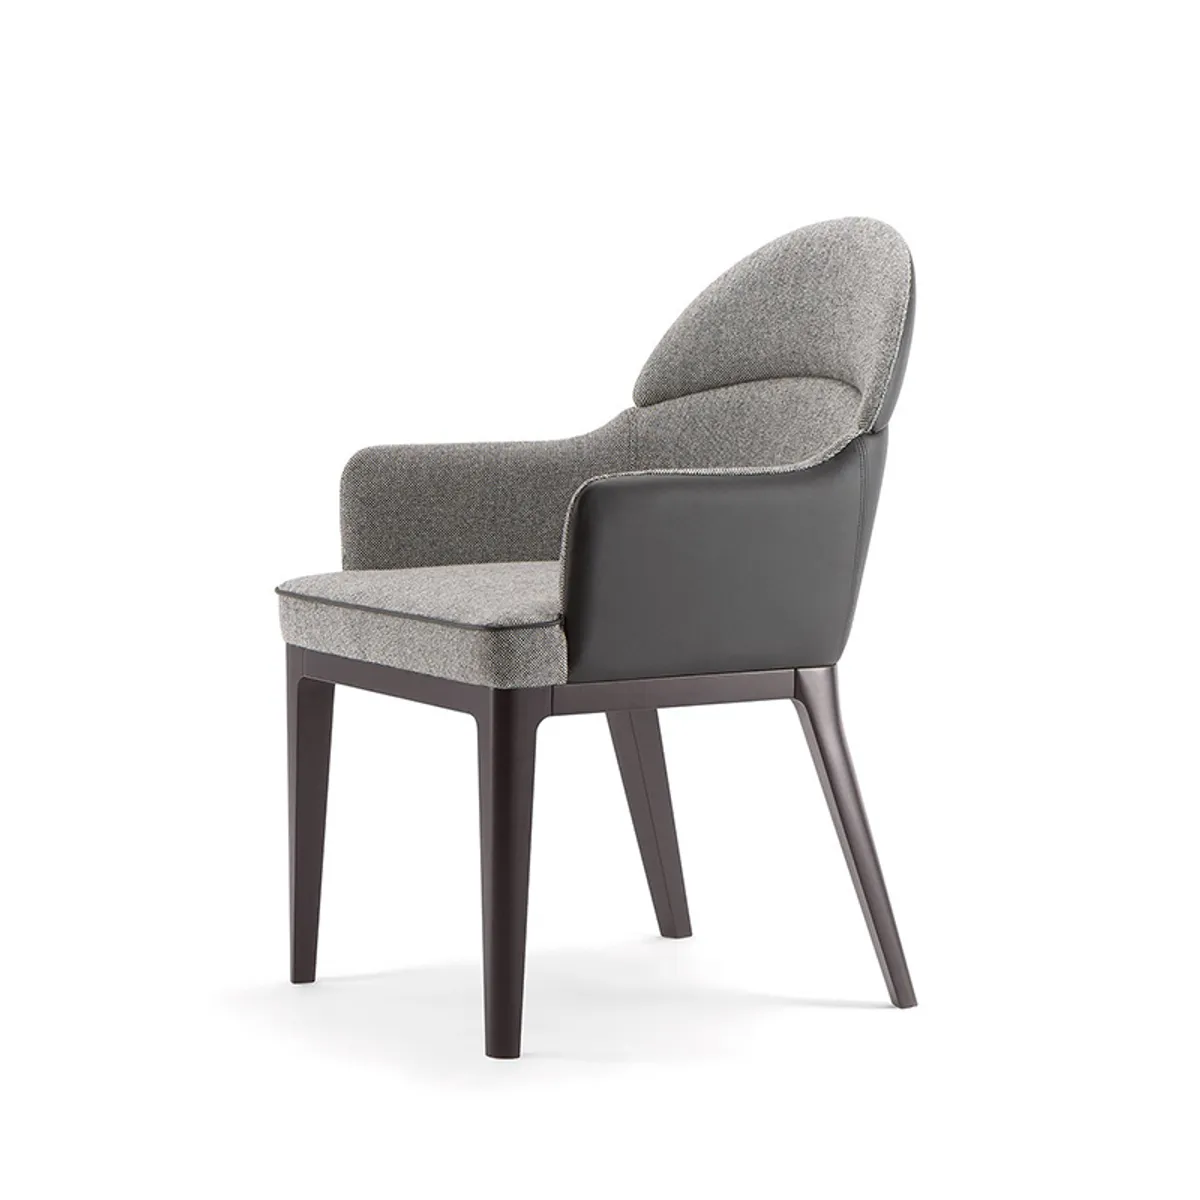 Dallas Armchair Contemporary Upholstered Furniture Insideoutcontracts